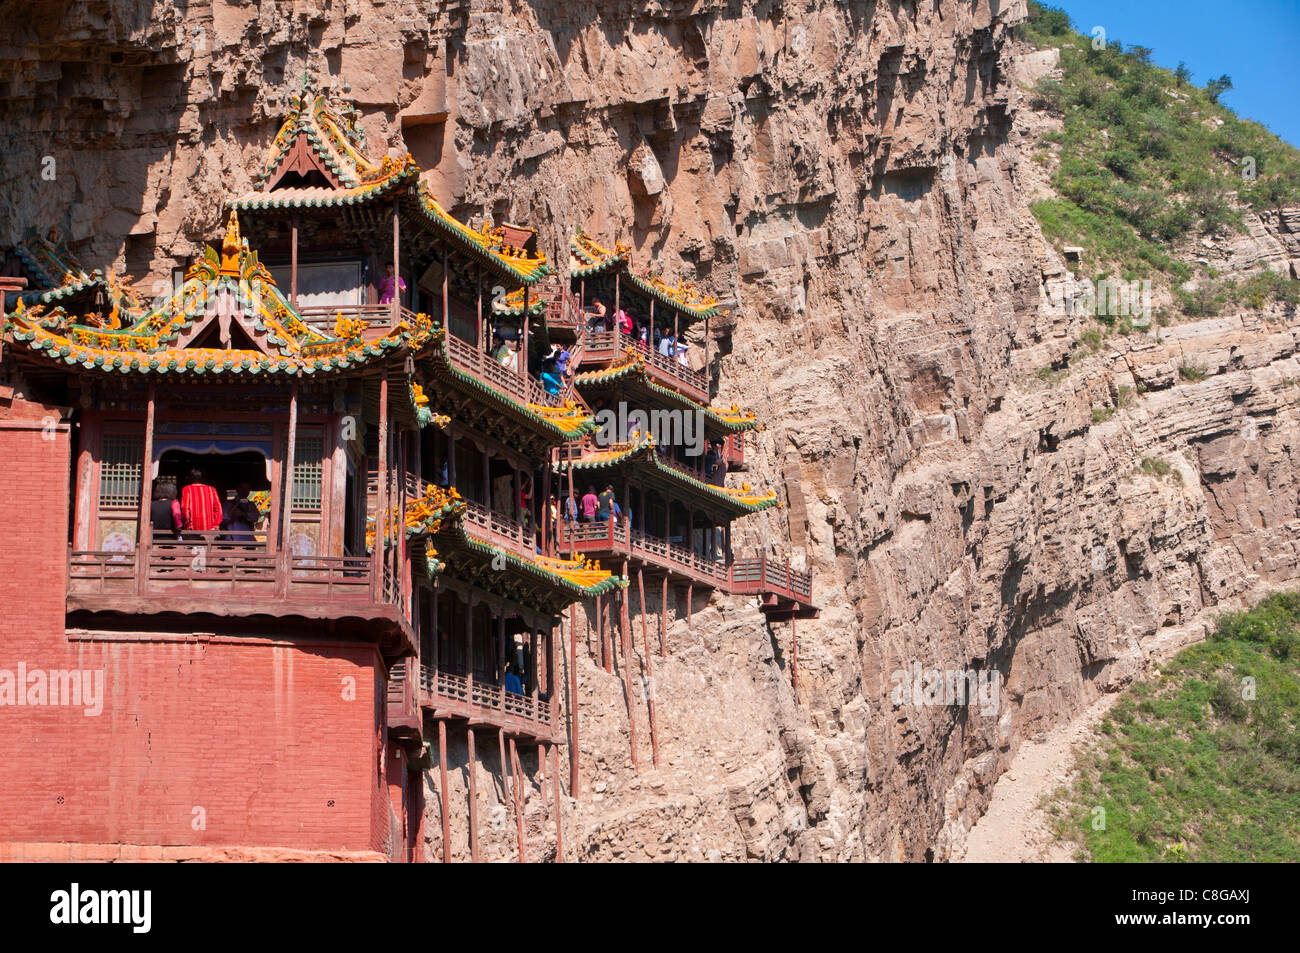 The Hanging Temple (Hanging Monastery) near Mount Heng in the province of Shanxi, China Stock Photo